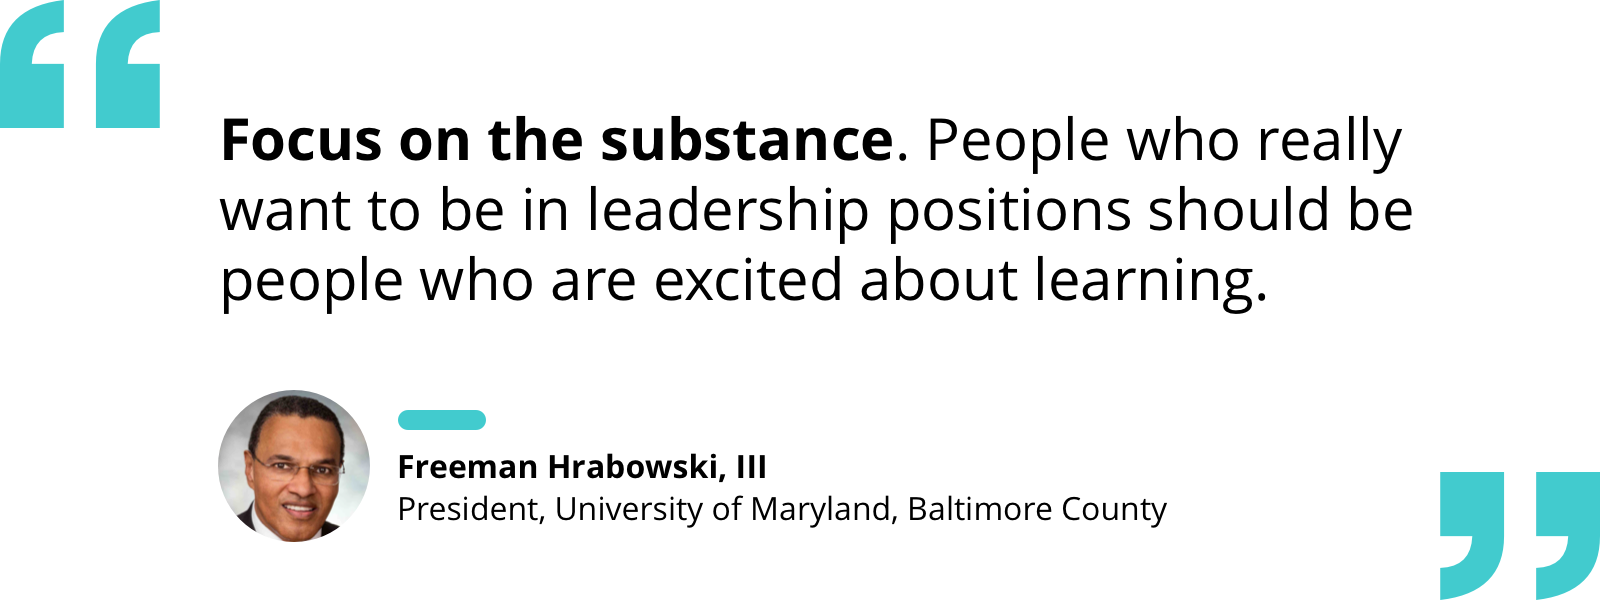 Quote by Freeman Hrabowski re: the most substantial leaders being the most excited about learning.